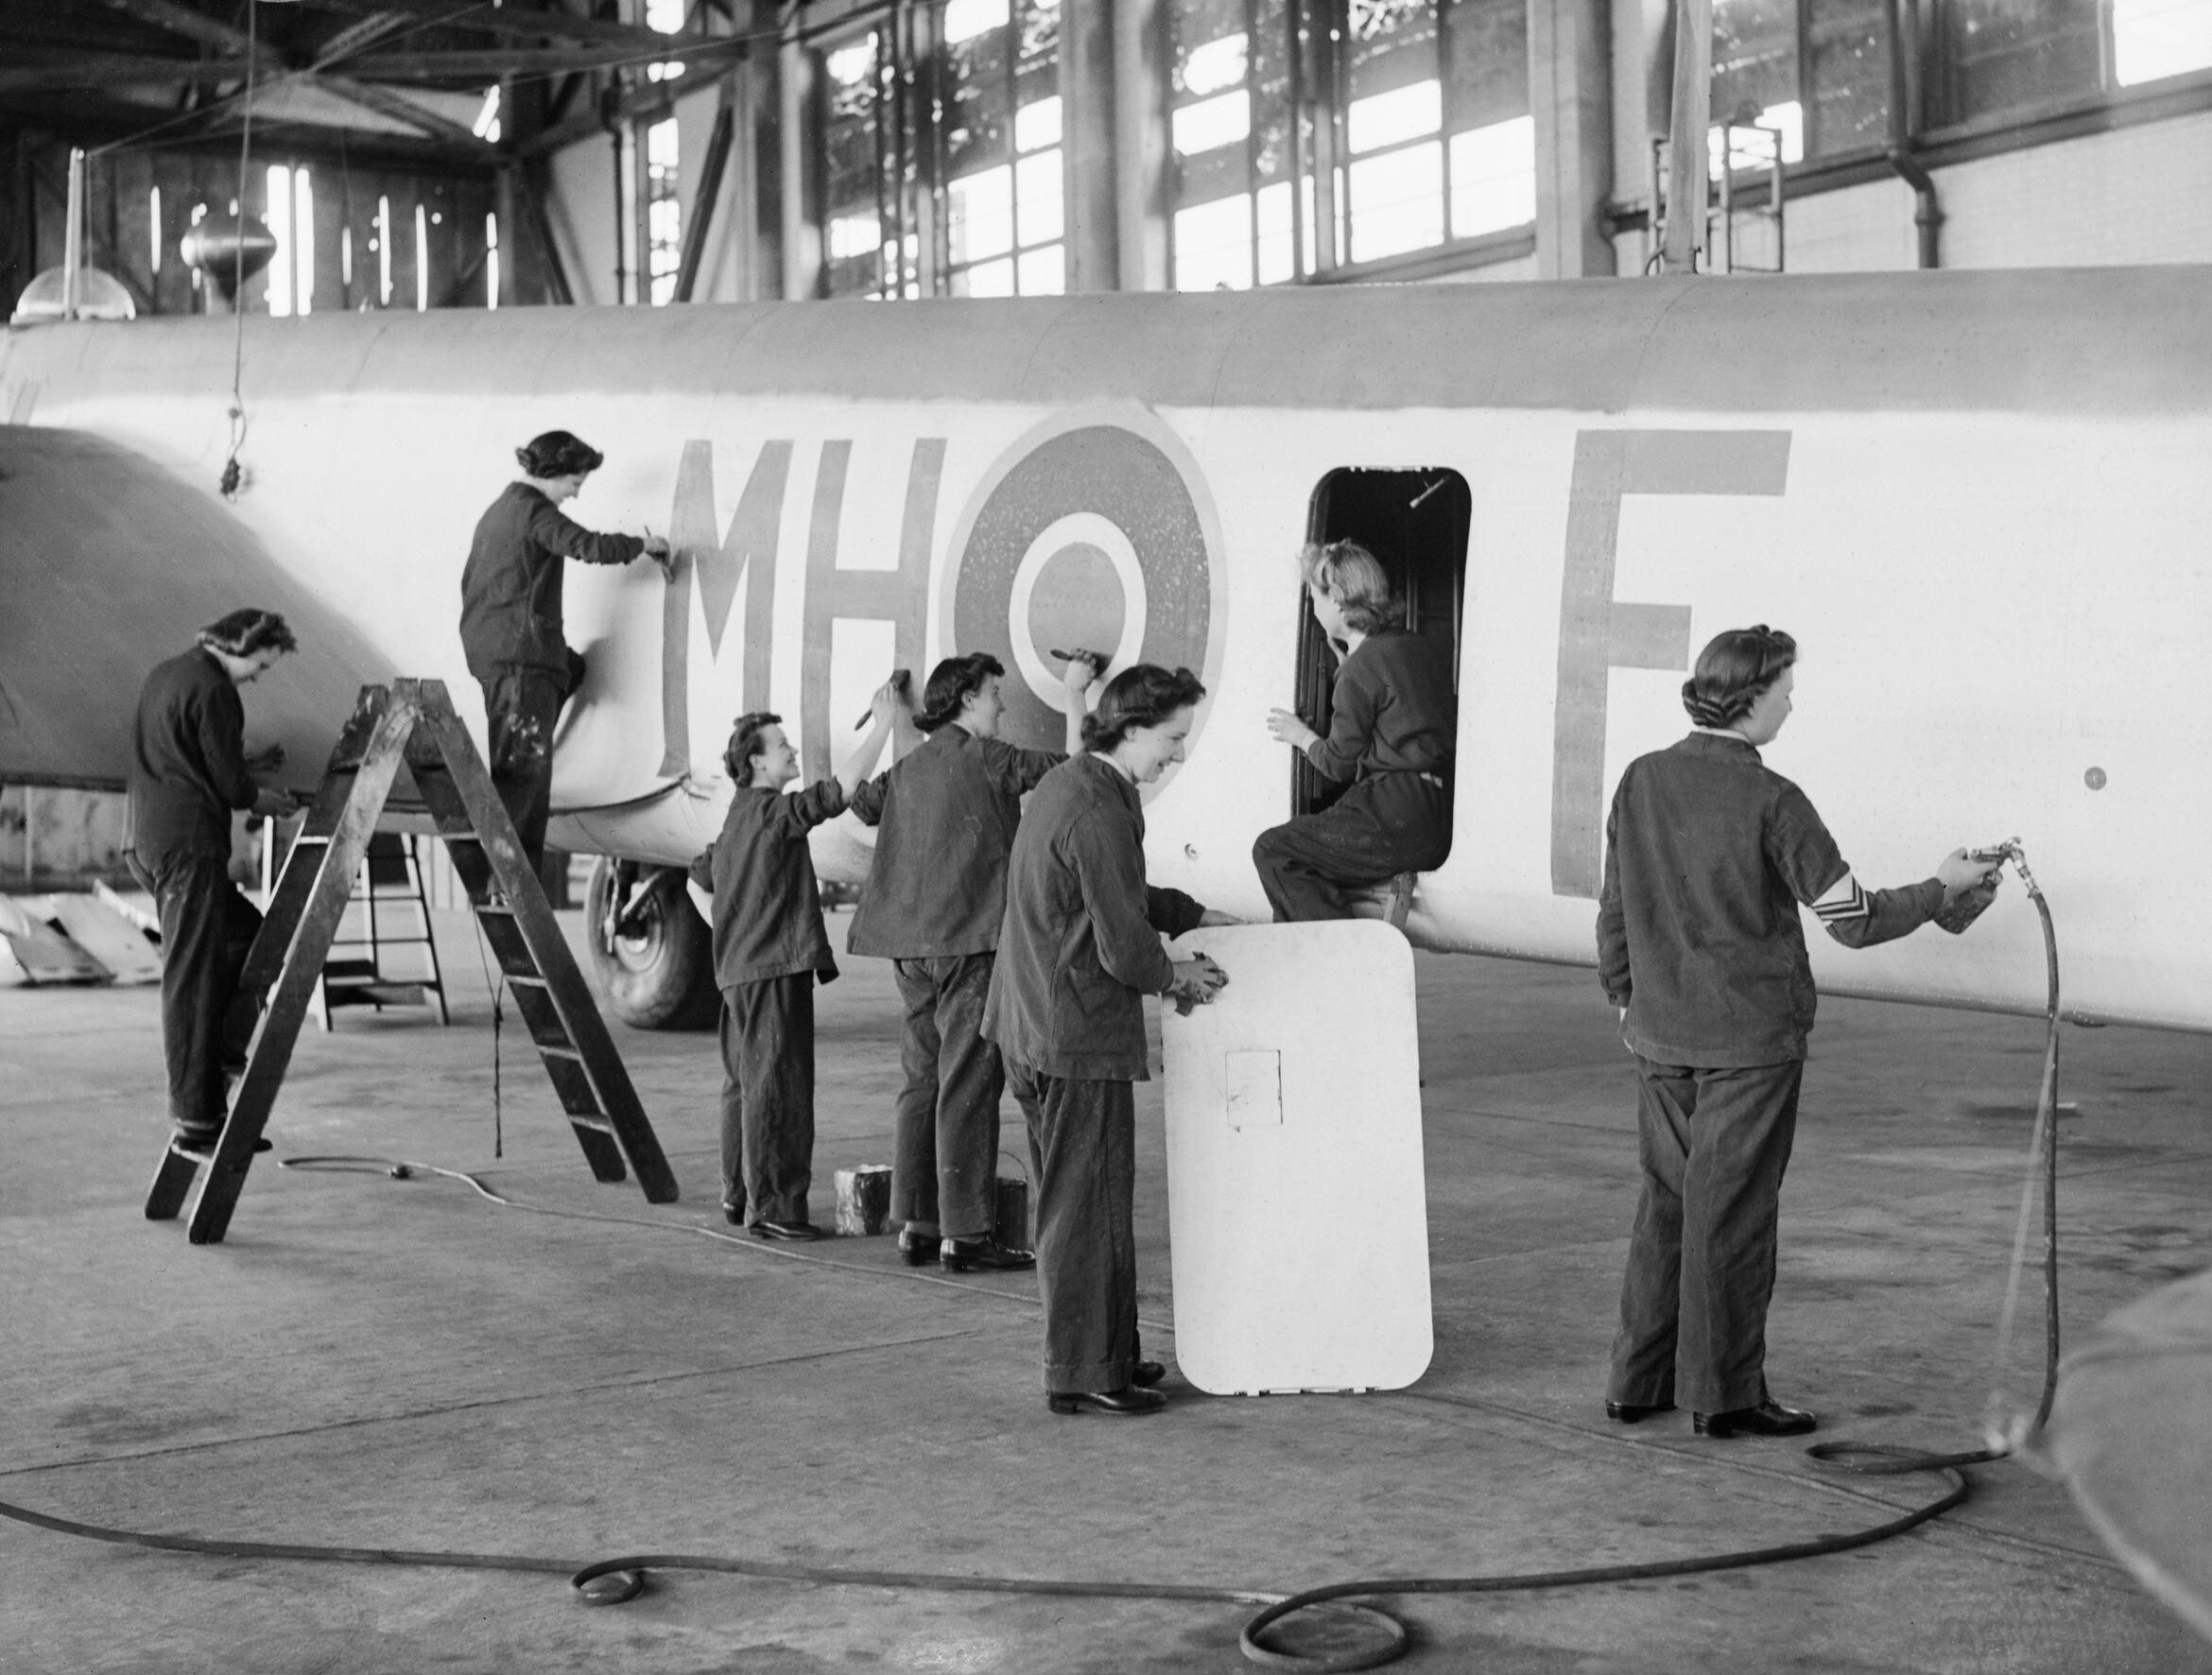 WAAF fabric workers and workshop hands at a RAF Coastal Command Maintenance Unit cleaning and painting a Whitley Mark V bomber of No. 51 Squadron RAF, RAF Gosport, Hampshire, England, United Kingdom, date unknown